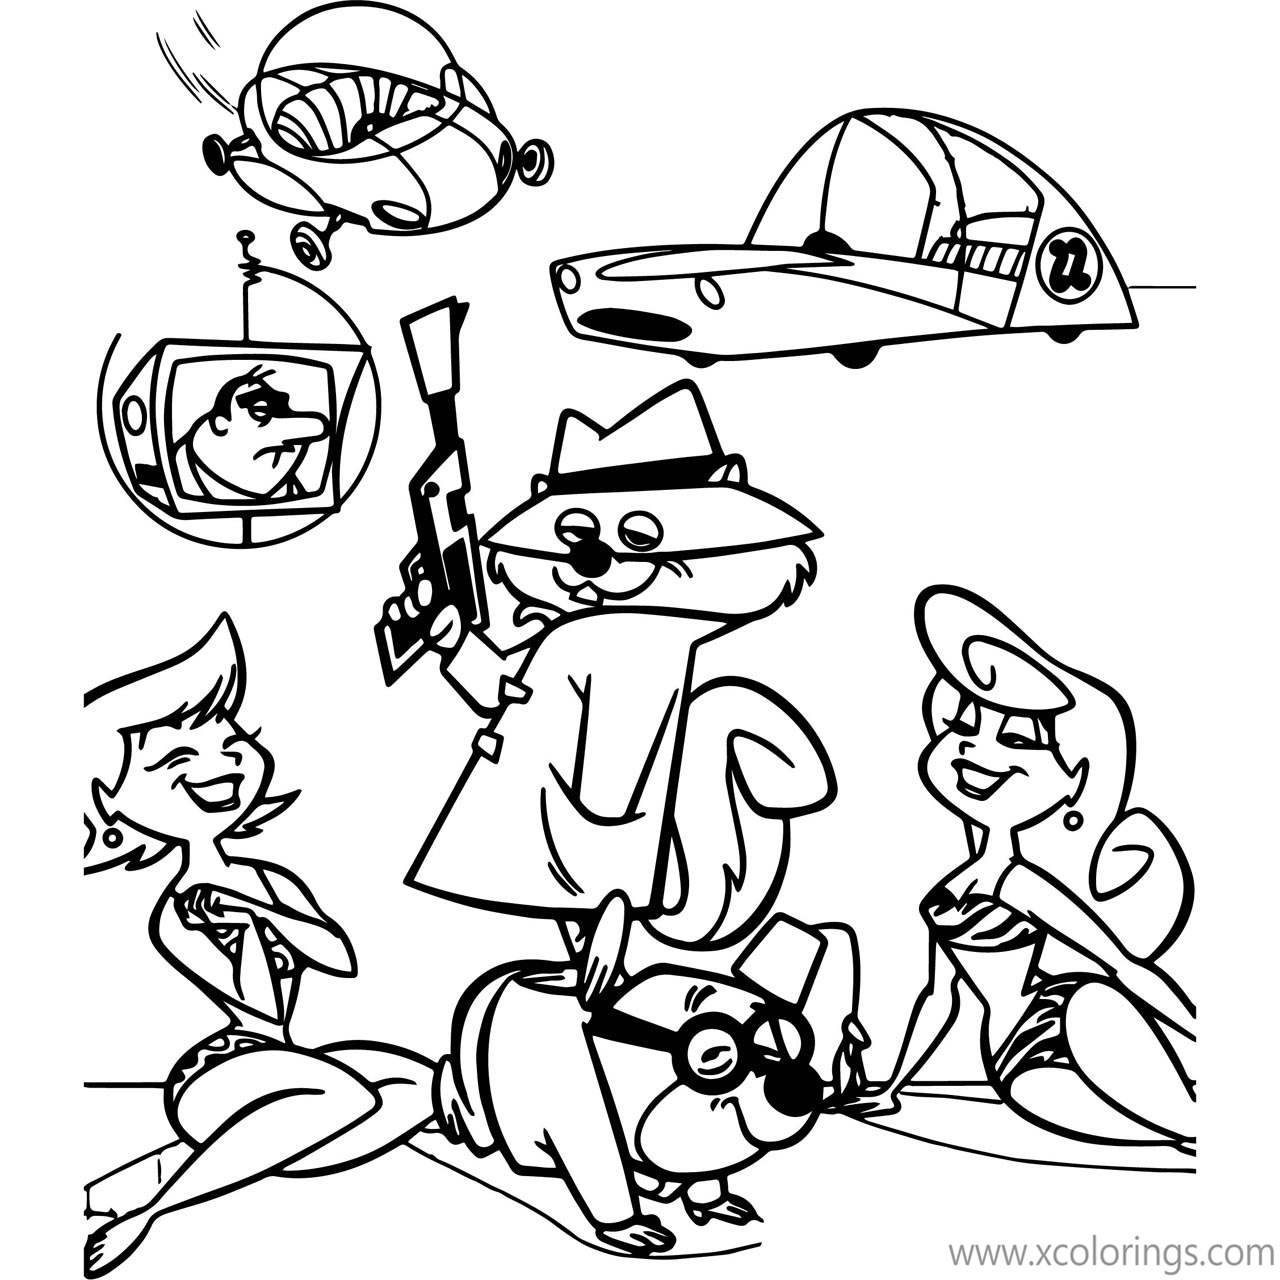 Free Secret Squirrel Coloring Pages Hanna Barbera printable